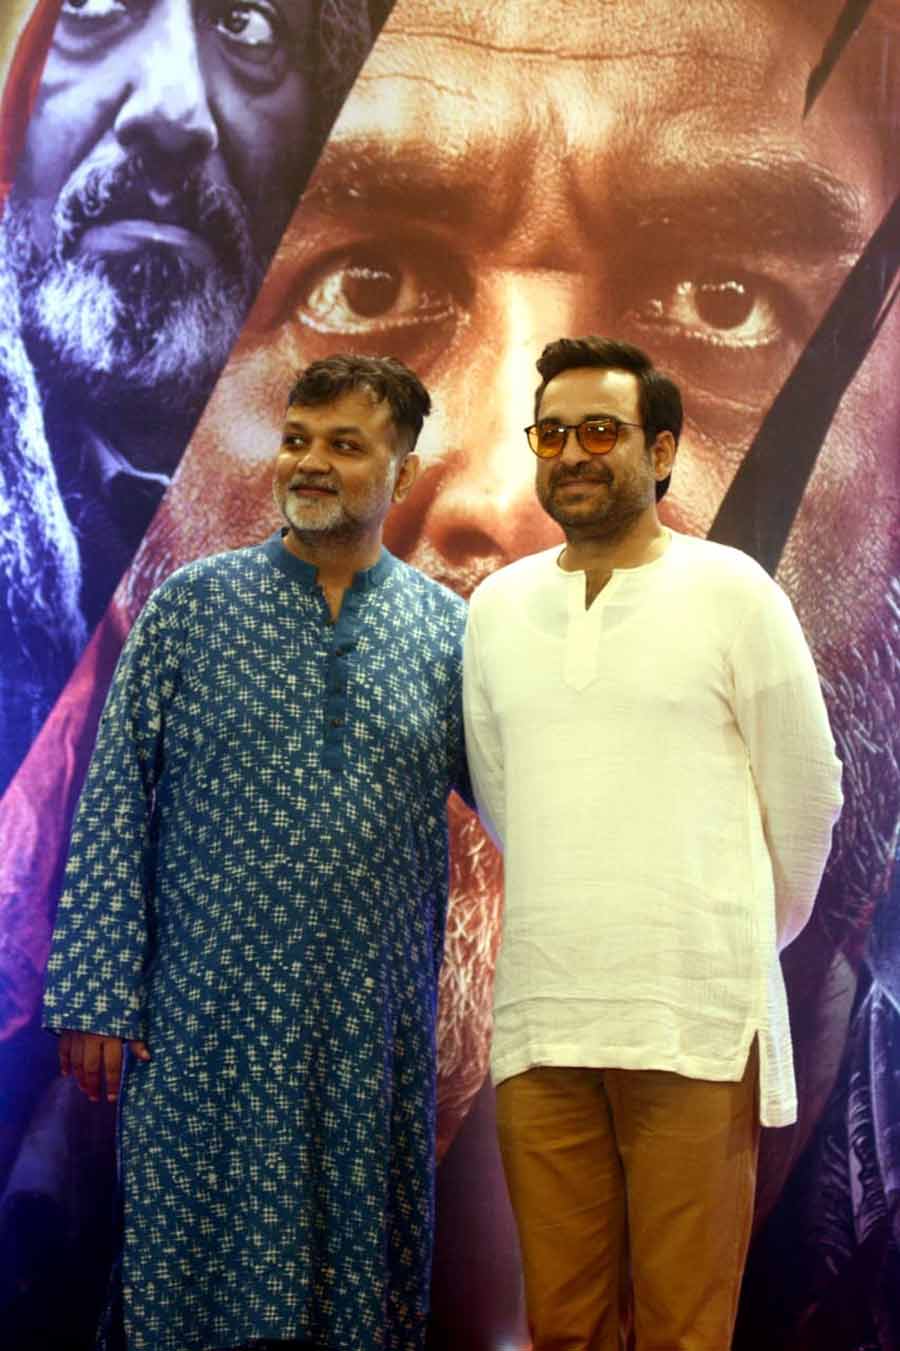 (From left) Film director Srijit Mukherji and actor Pankaj Tripathi at a promotional event in the city for their upcoming film ‘Sherdil: The Pilibhit Saga’ on Monday